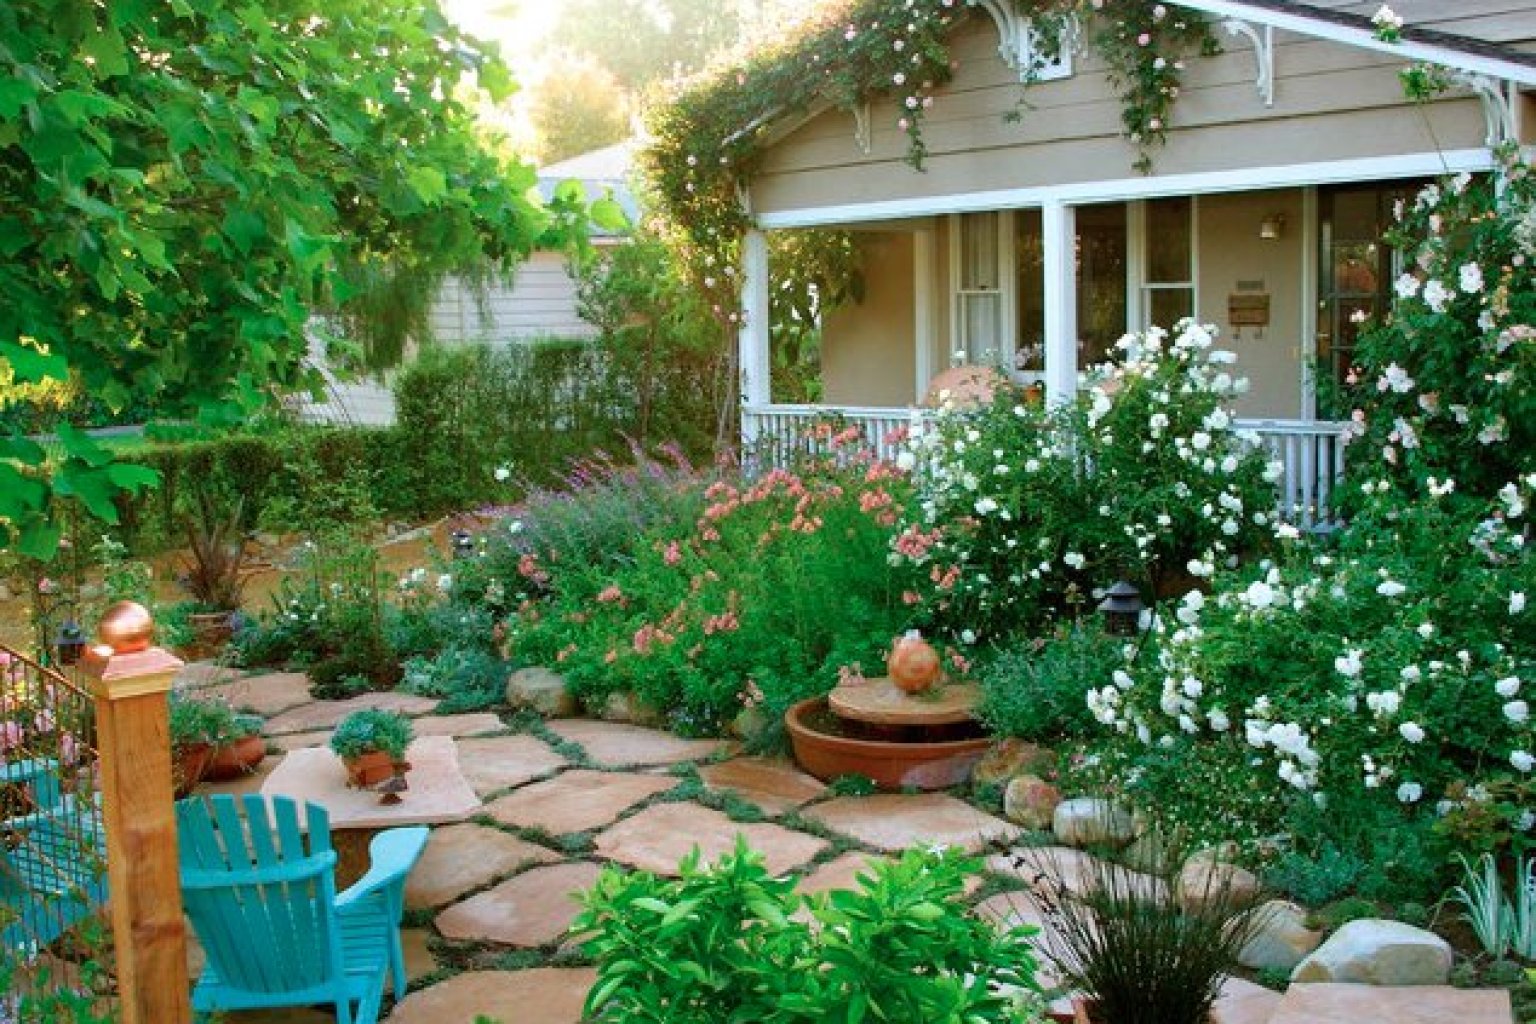 10 Cottage Gardens That Are Just Too Charming For Words (PHOTOS)